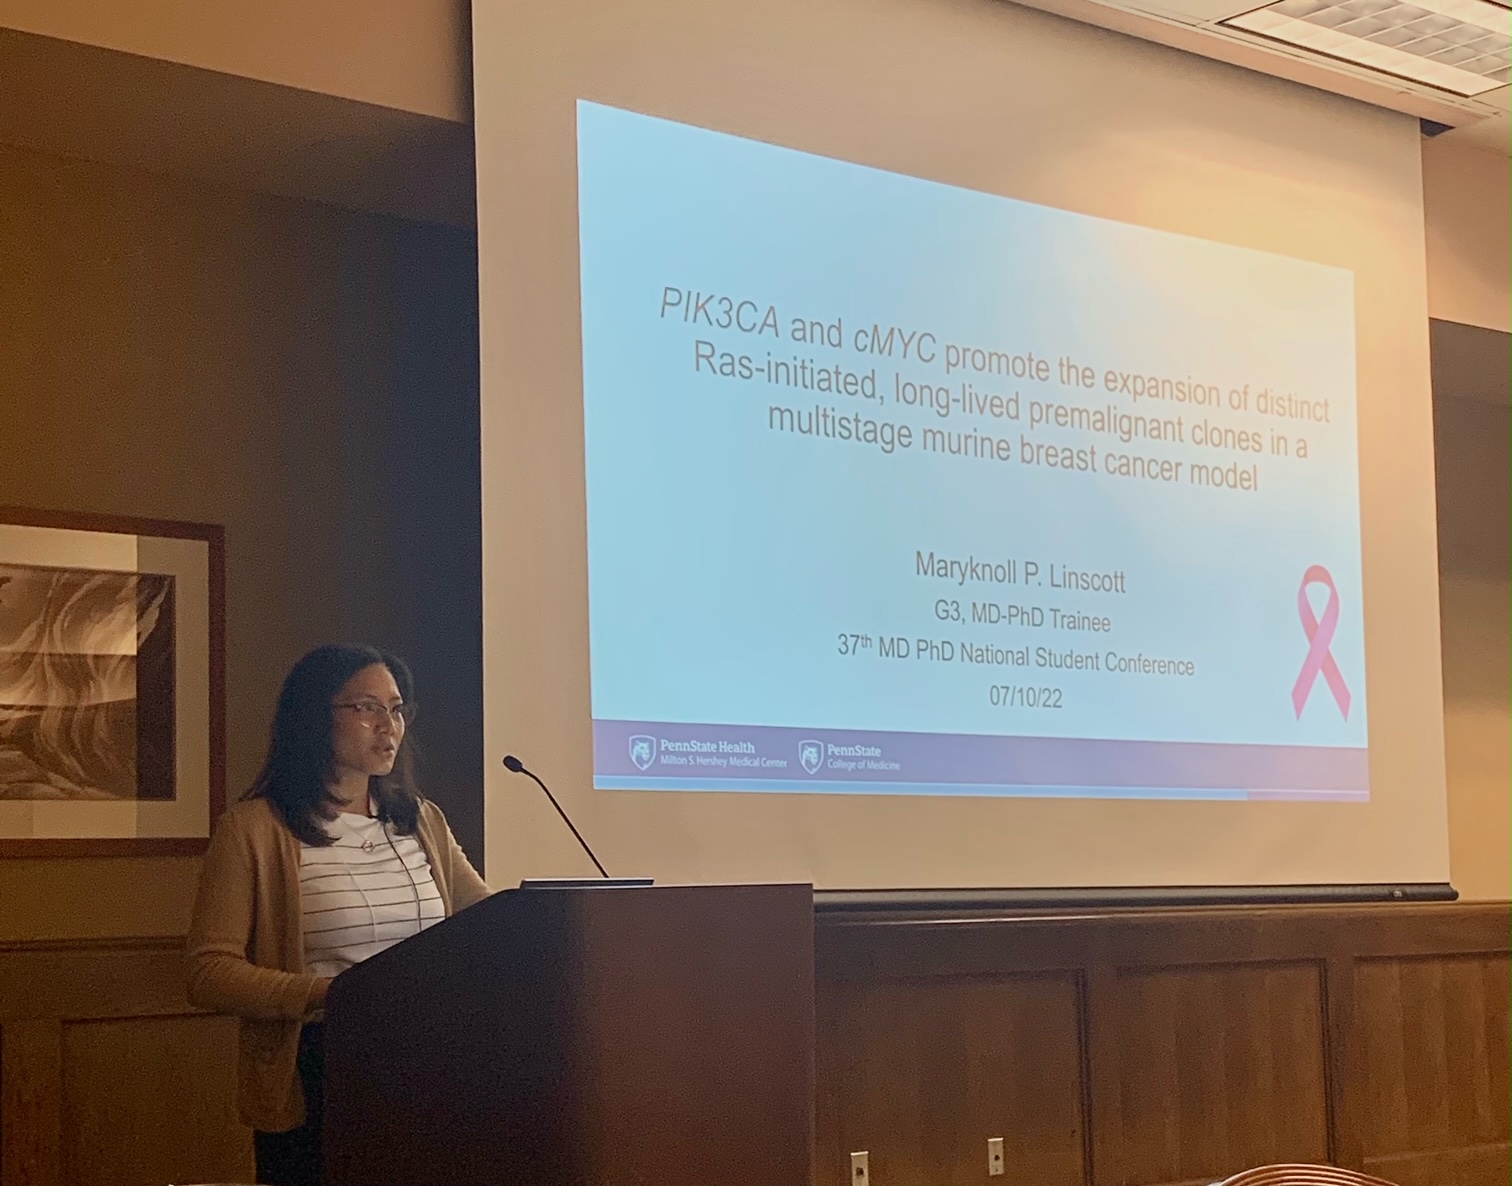 Maryknoll Linscott, MD/PhD student, stands behind a lectern with a microphone, and a large screen to her left shows a slide form her oral presentation.